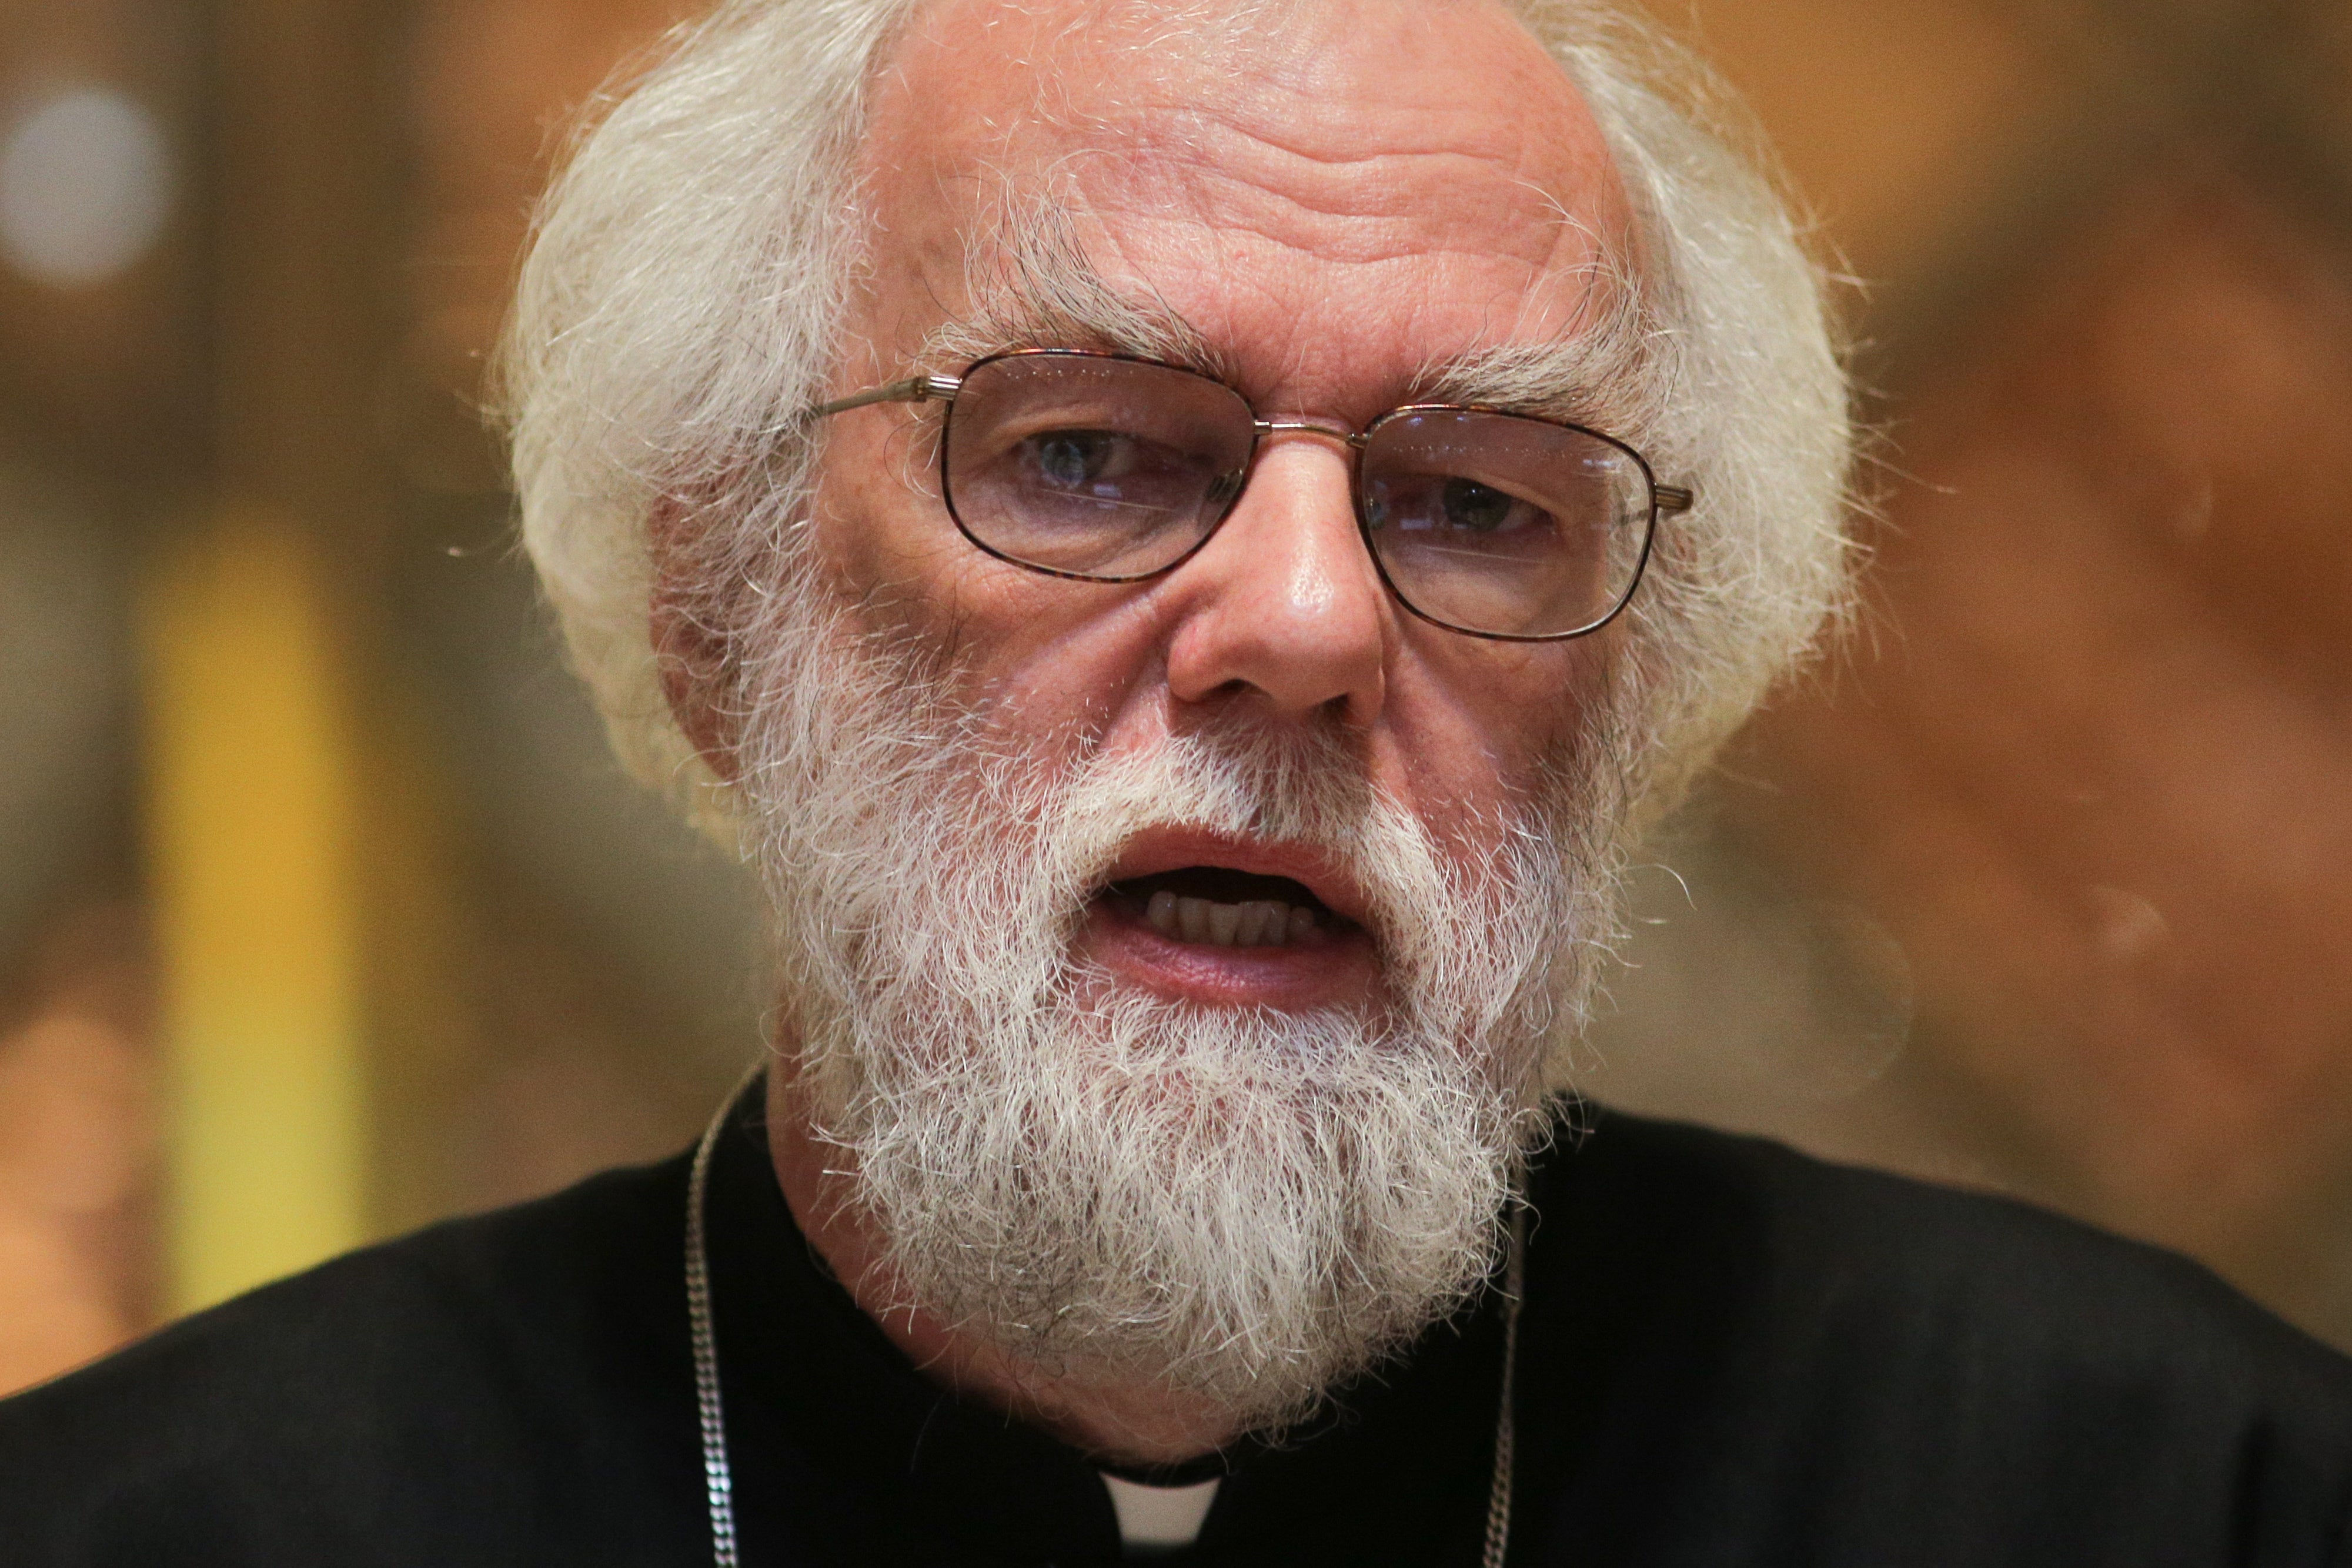 Dr Rowan Williams, former Archbishop of Canterbury, is one of more than 200 church leaders who has urged the Government not to support new oil and gas developments (Daniel Leal-Olivas/PA)